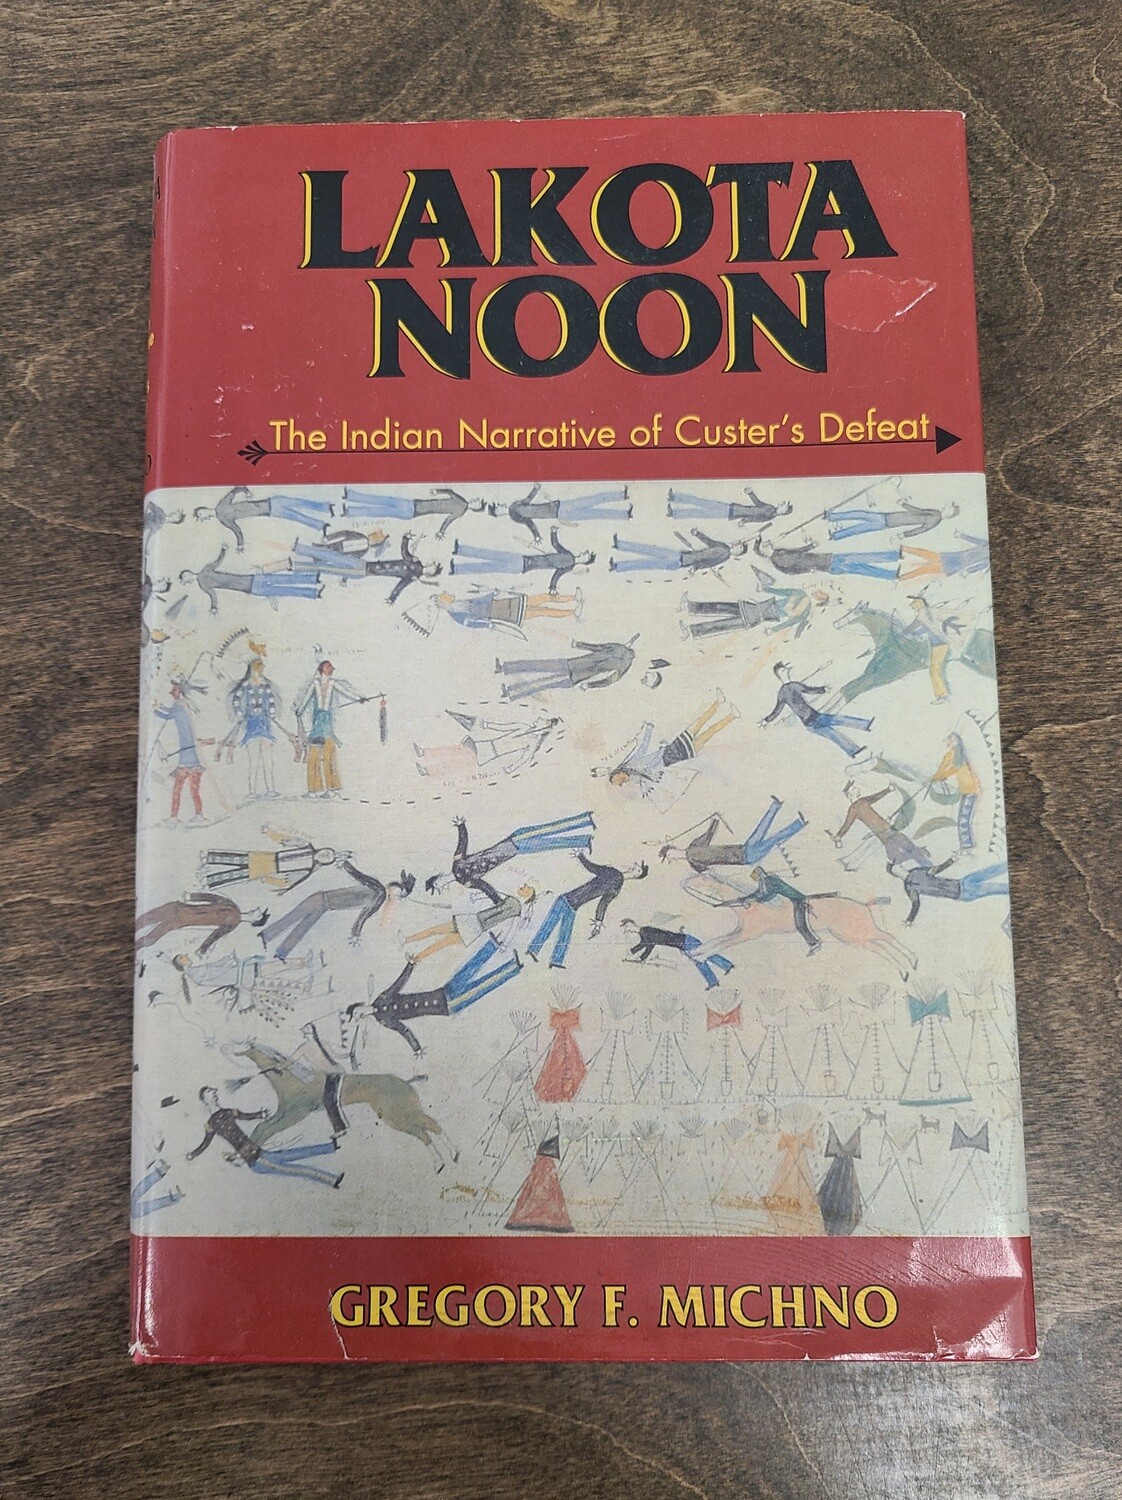 Lakota Noon: The Indian Narrative of Custer's Defeat by Gregory F. Michno